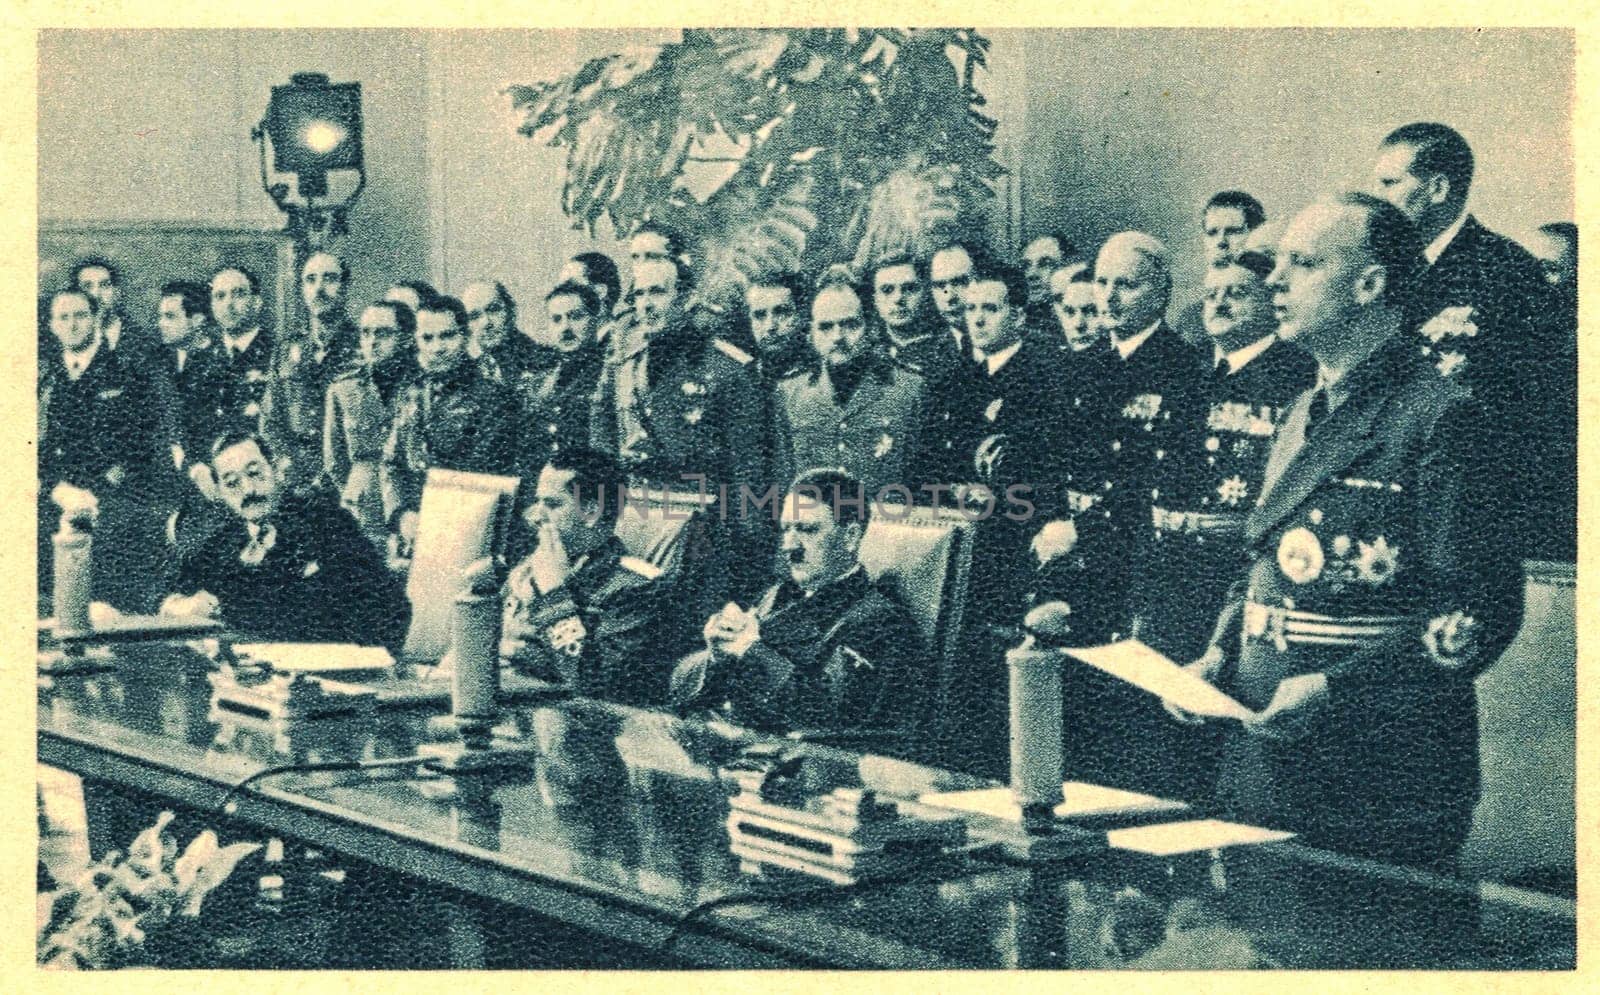 BERLIN, GERMANY - SEPTEMBER 27, 1940: The Tripartite Pact, also known as the Berlin Pact, was an agreement between Germany, Italy and Japan signed in Berlin on 27 September 1940. Signing ceremony for the Axis Powers Tripartite Pact seated at front left (left to right) are Japan's Ambassador Saburo Kurusu (leaning forward), Italy's Minister of Foreign Affairs Galeazzo Ciano and Germany's Fuhrer Adolf Hitler (slumping in his chair).